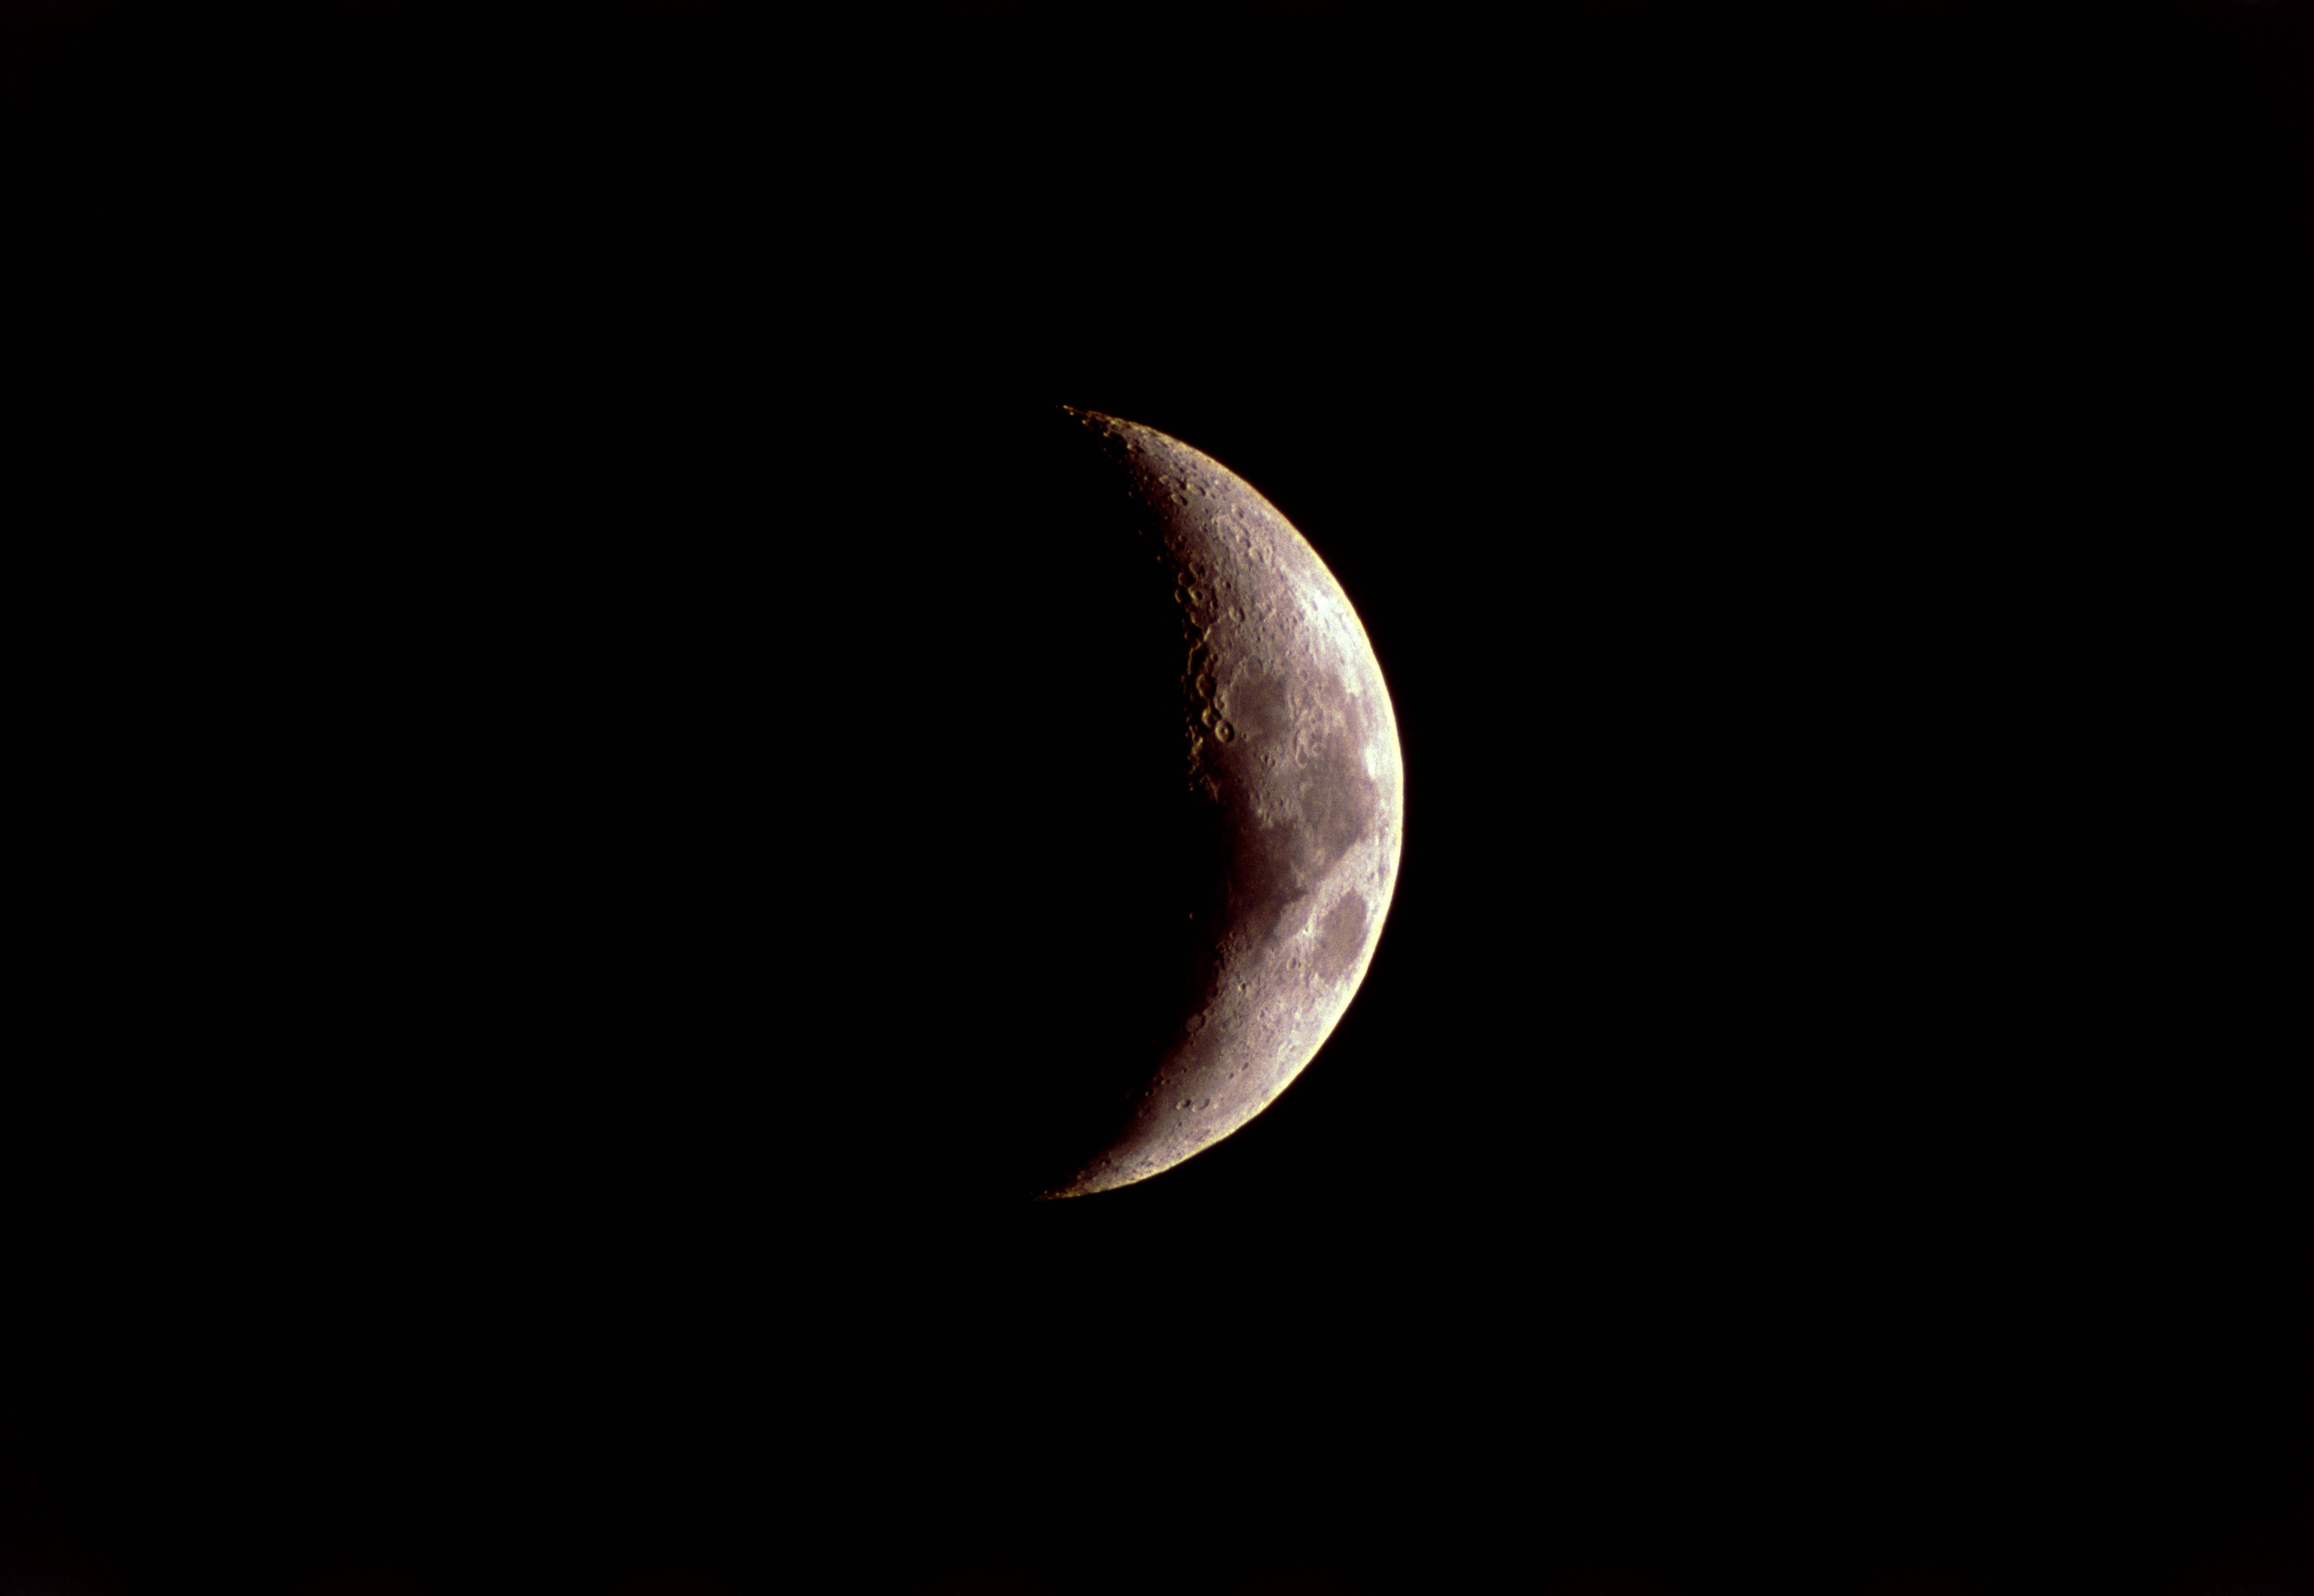 Waxing crescent Moon. Optical image of a waxing crescent Moon six days into its cycle. The Moon is said to wax when it is increasing in apparent size. The phases of the Moon are due to its orbit around Earth. When it lies in between the Earth and the Sun, only the unlit side faces us, and it is called a new Moon (day one). When it has moved round so that the Earth lies between it and the Sun, we see the full lit face, called a full Moon. A cycle takes around 28 days. North is at top. For the sequence of the Moon's phases, see images R340/526-532.